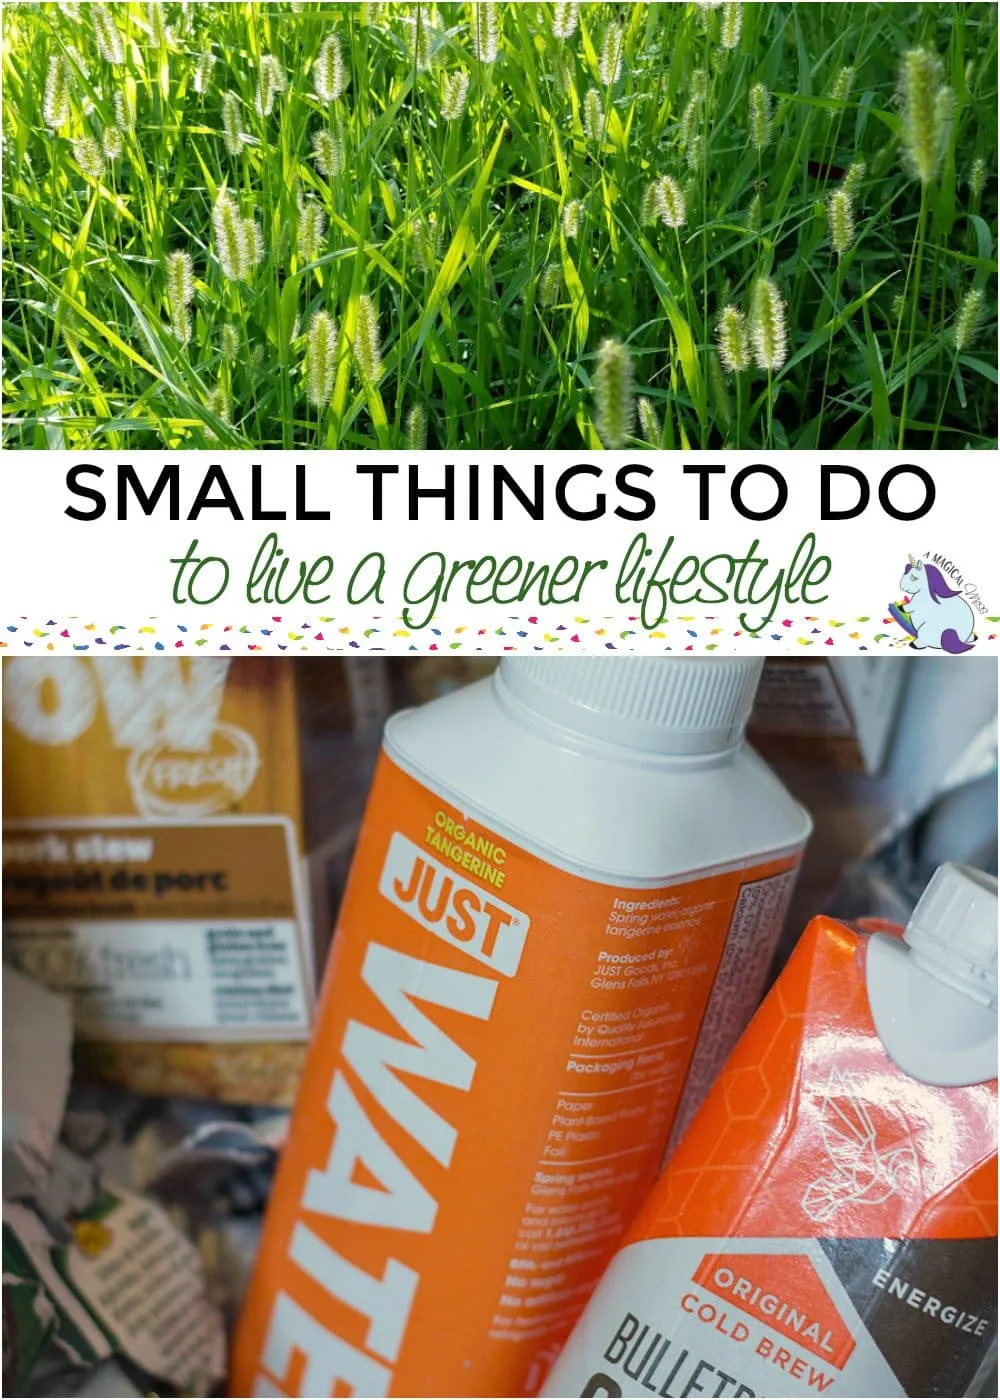 Small Things to do to Live a Greener Lifestyle